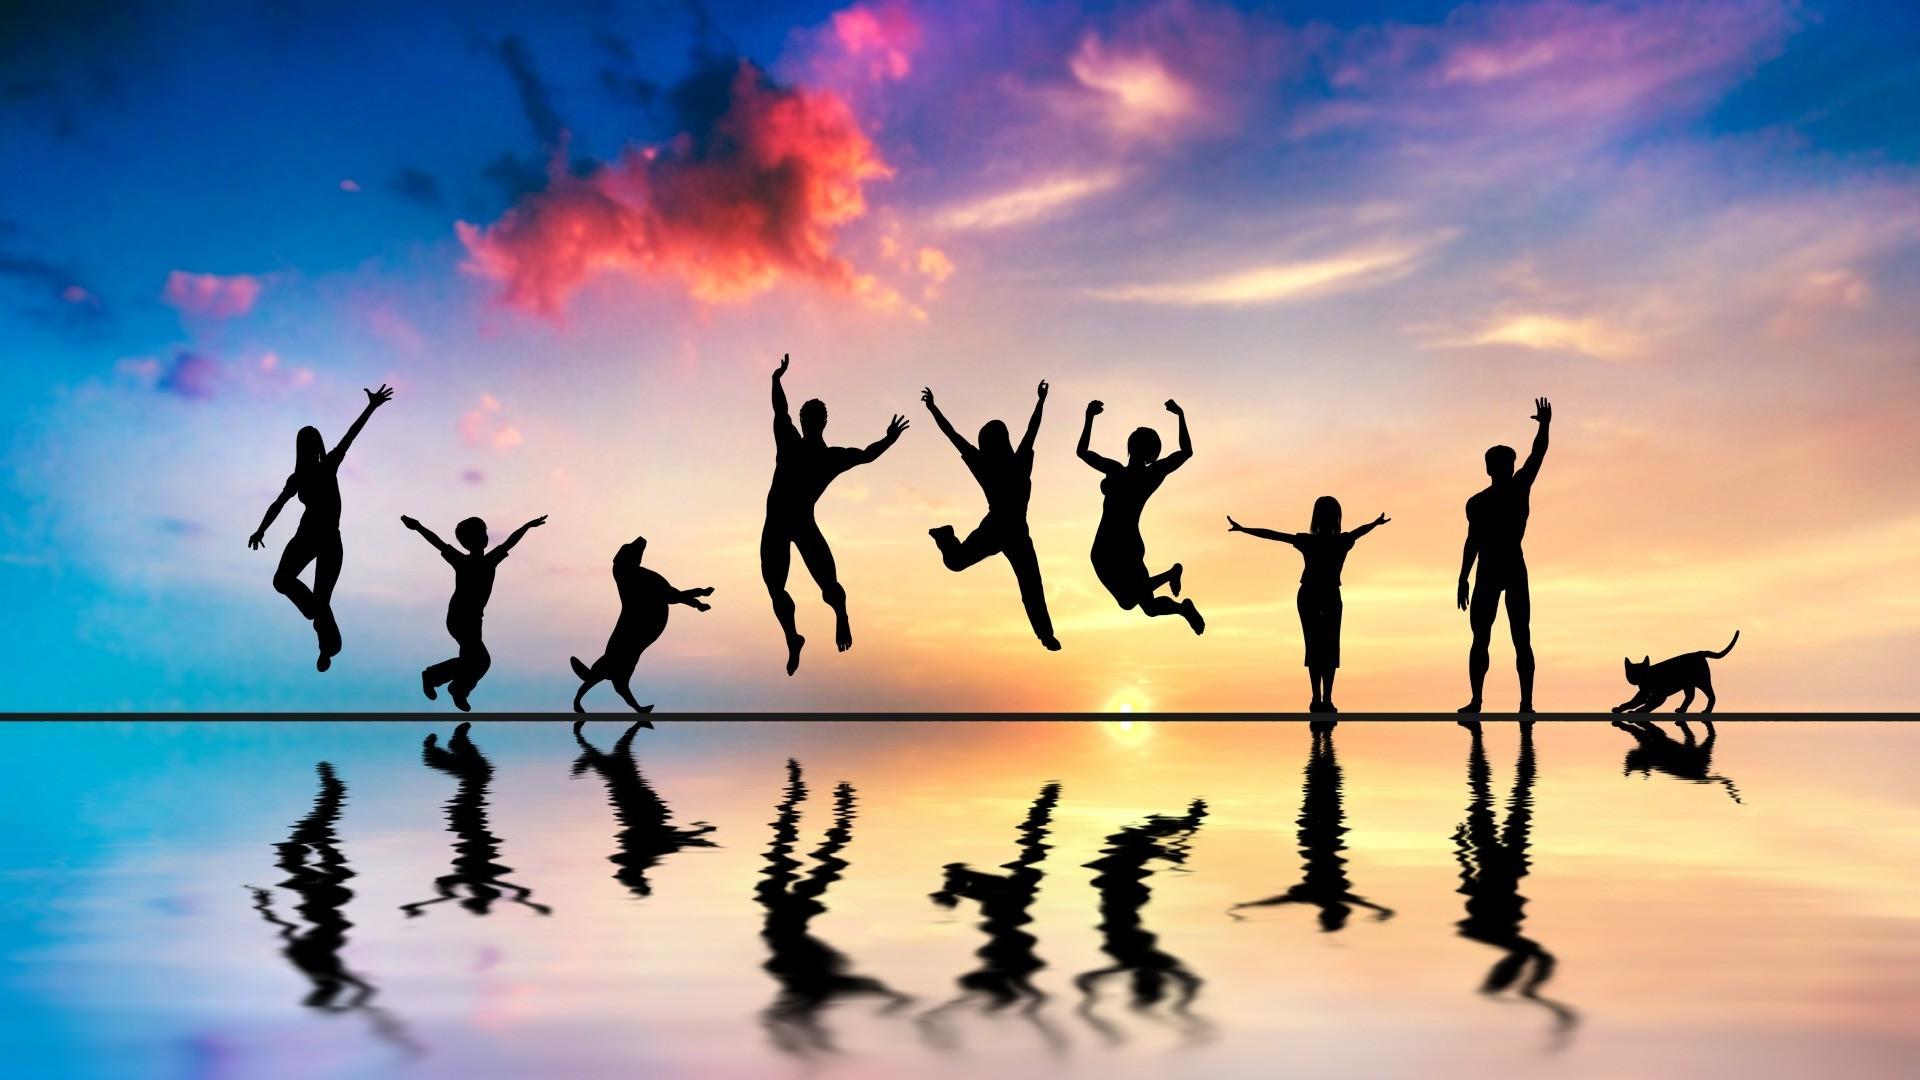 jumping silhouette group of people cat sea reflection Wallpaper